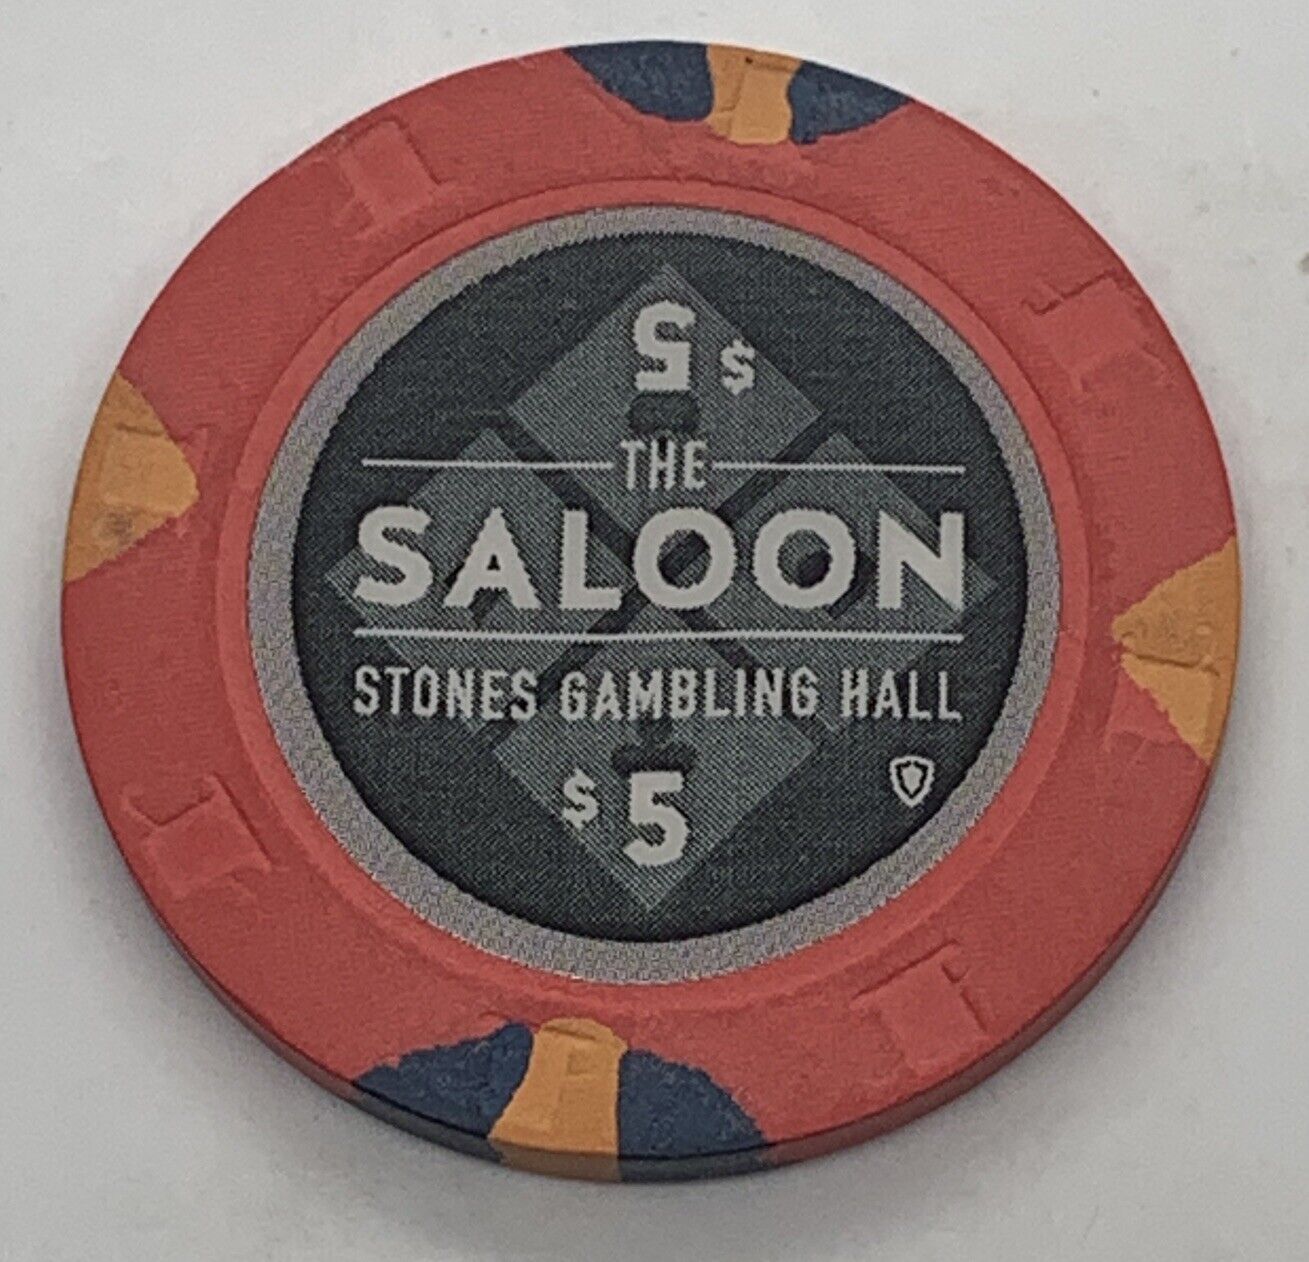 Stones Gambling Hall / The Saloon $5 Chip Citrus Heights California H&C 2014